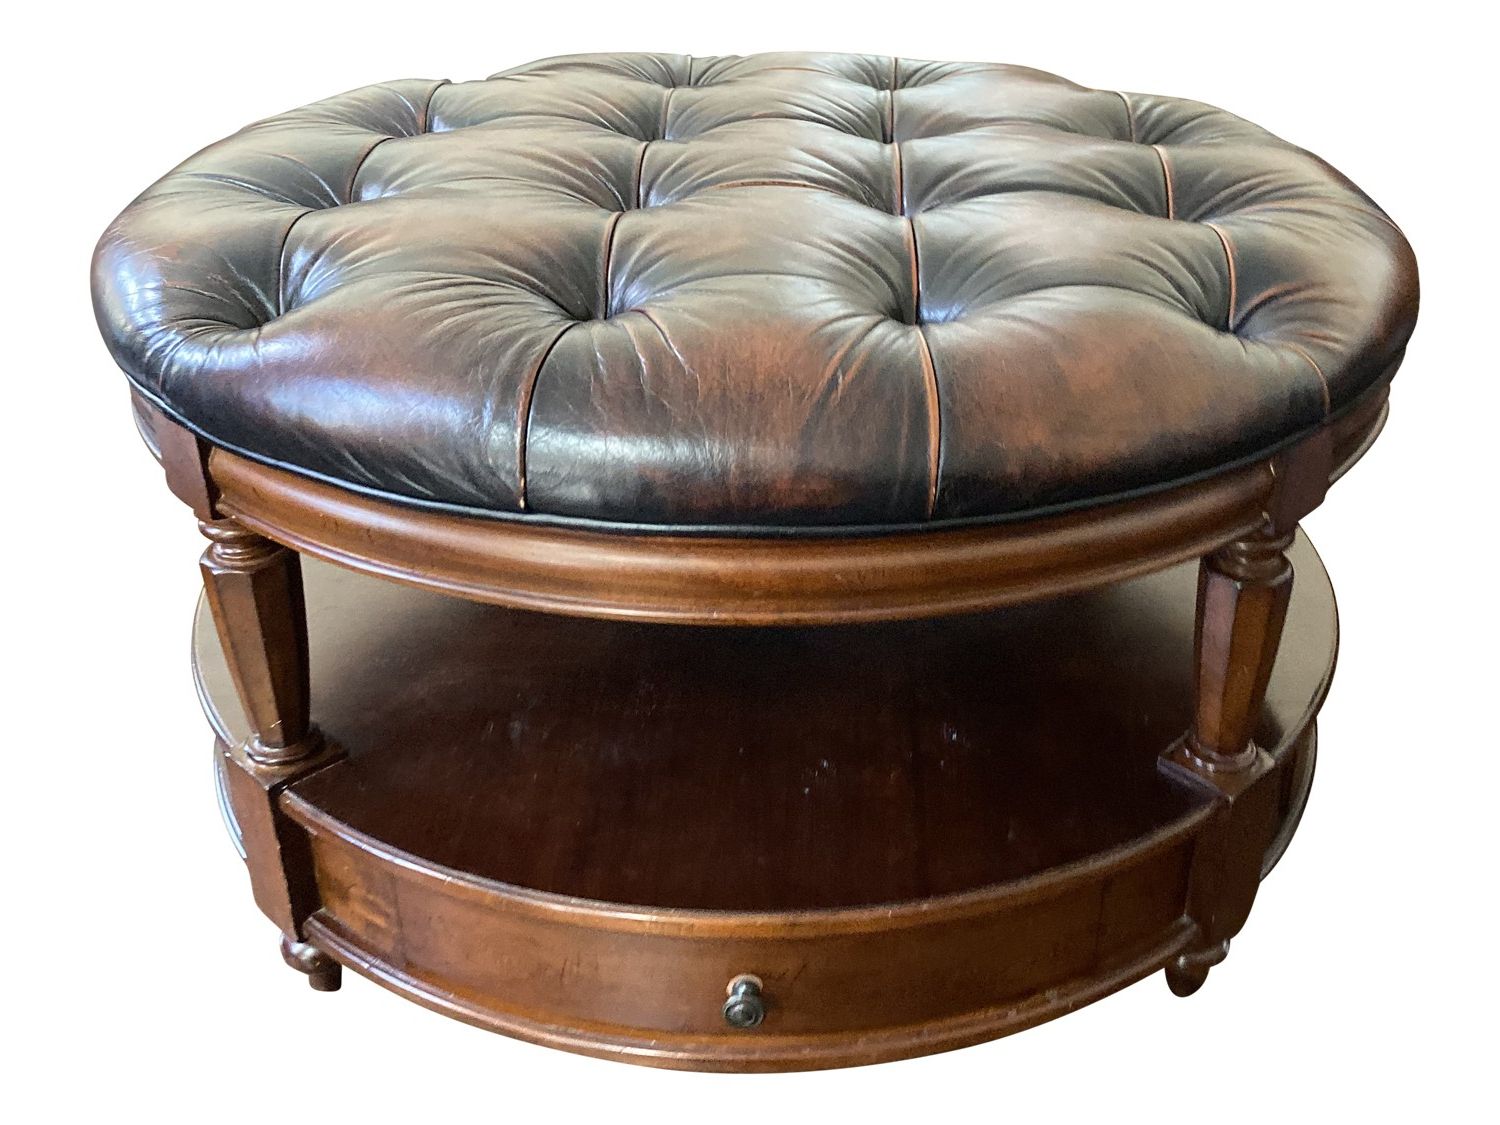 Silver And White Leather Round Ottomans Inside Well Liked Round Leather Tufted Table Ottoman • The Local Vault (View 9 of 10)